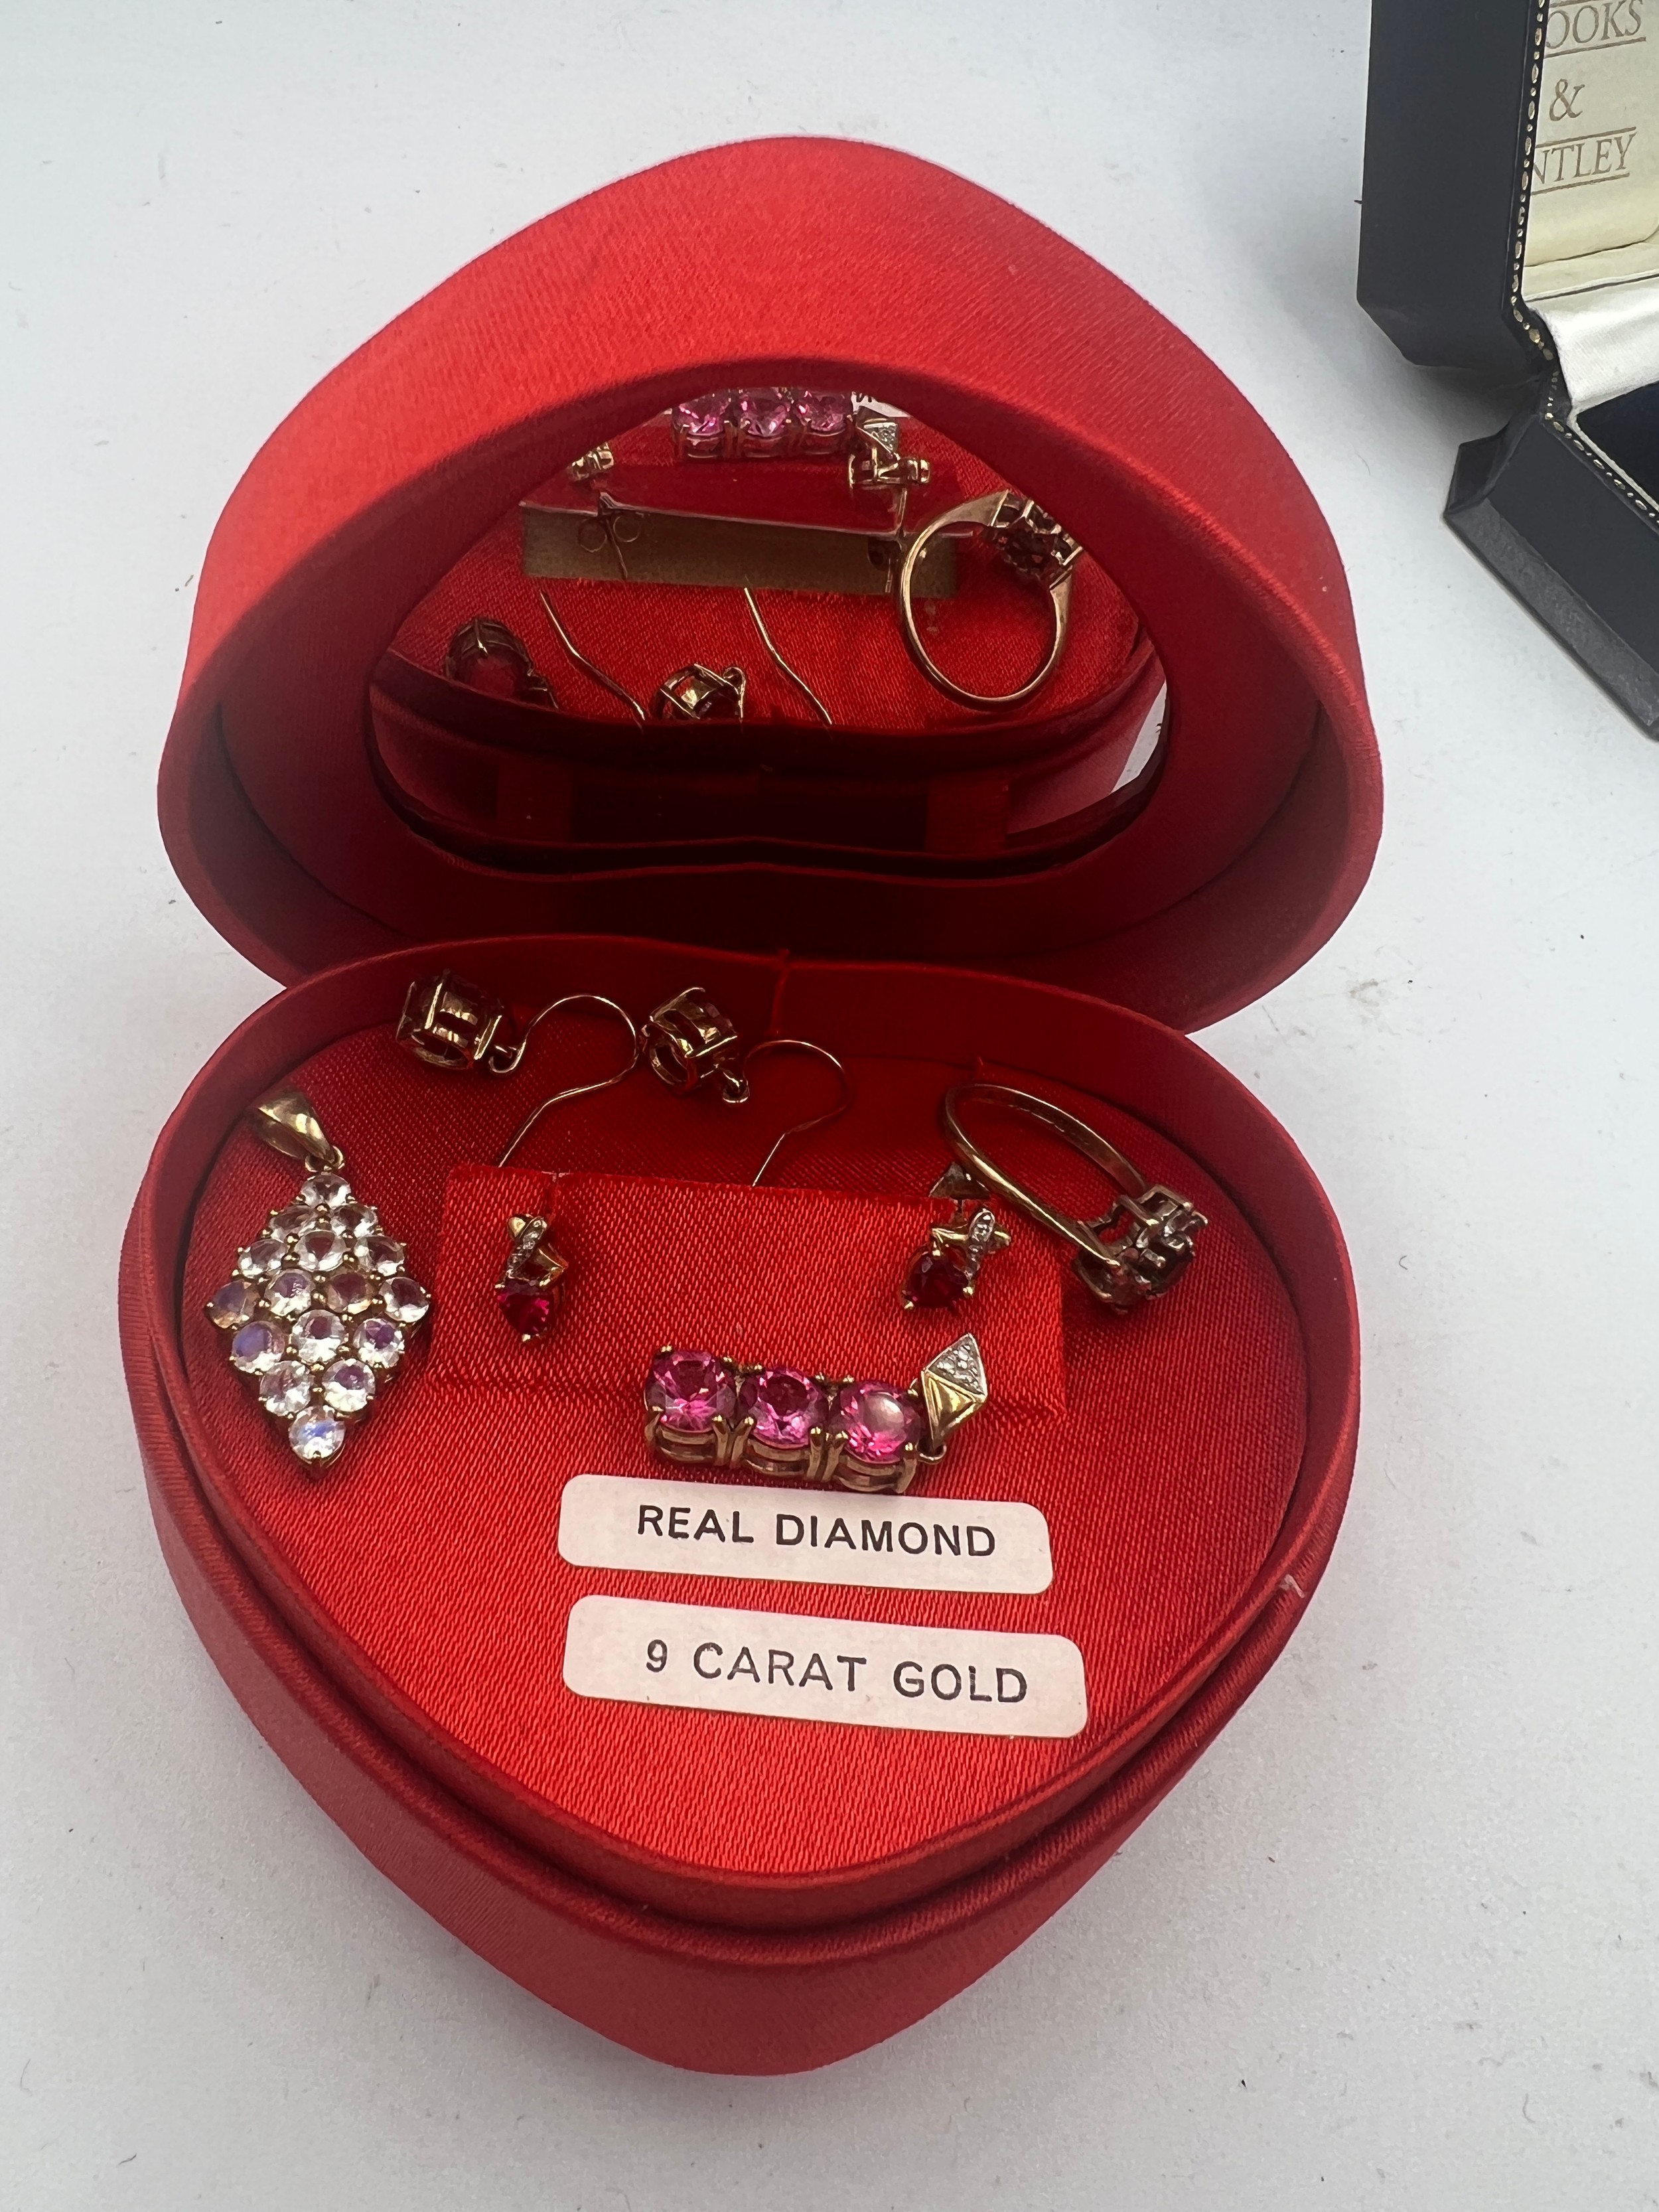 Jewellery to include 2 pairs of 9 carat gold mounted earrings, 2 x 9 carat gold gem set pendants and - Image 2 of 2